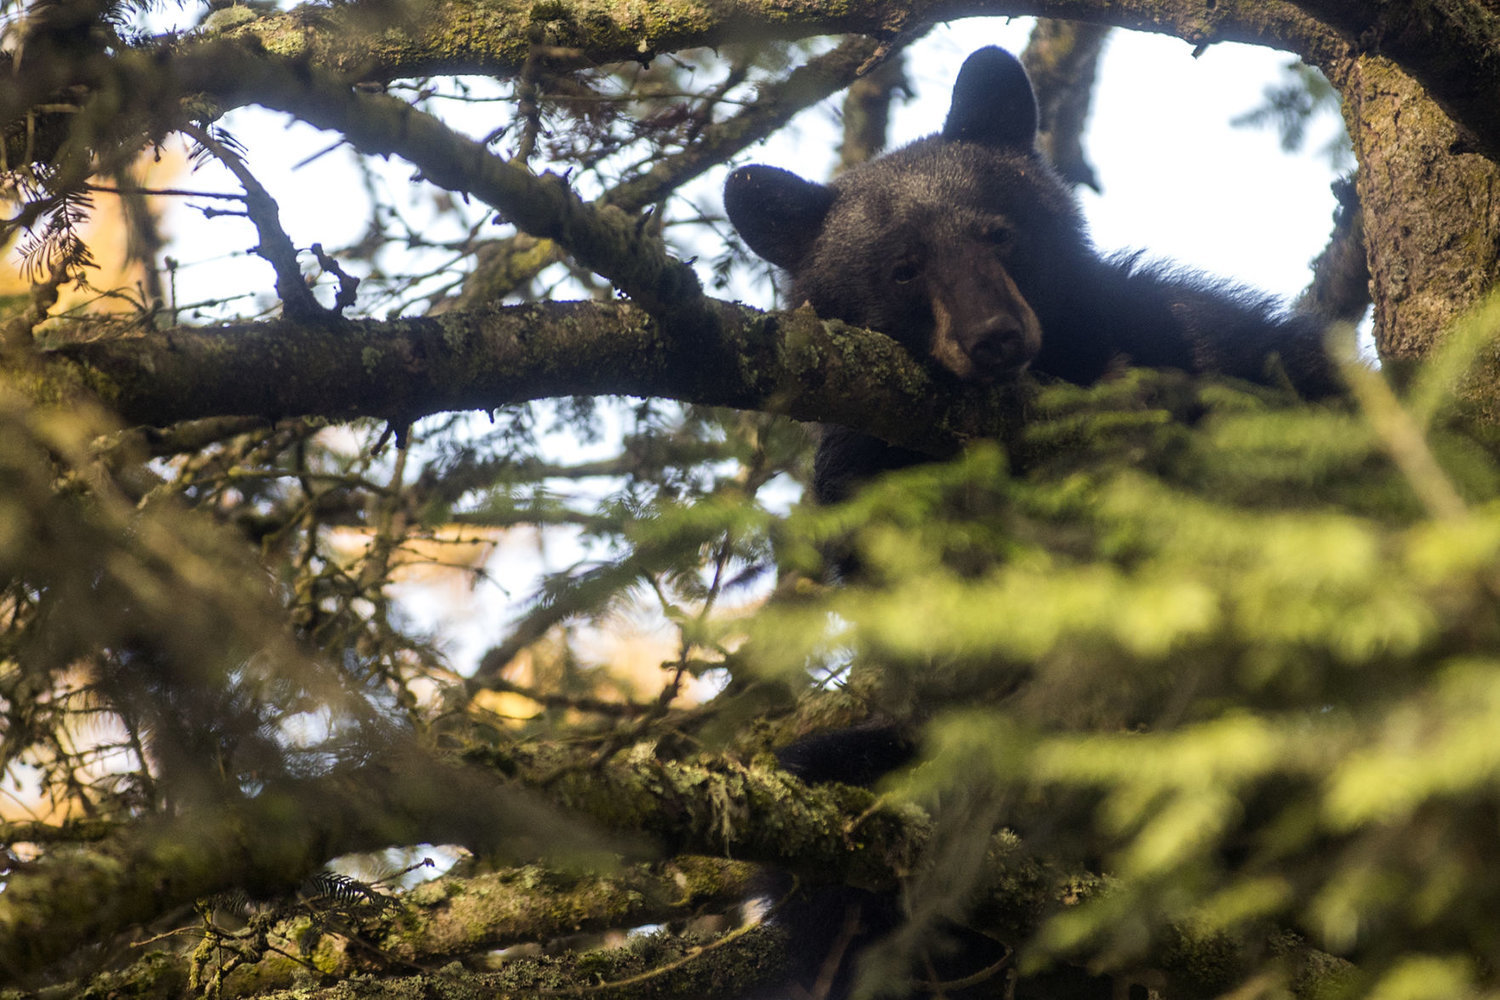 A black bear sits up in a tree in the backyard of a home on the 300 block of West Chestnut Street in Centralia in this Thursday, Oct. 8, 2015, Chronicle file photo.